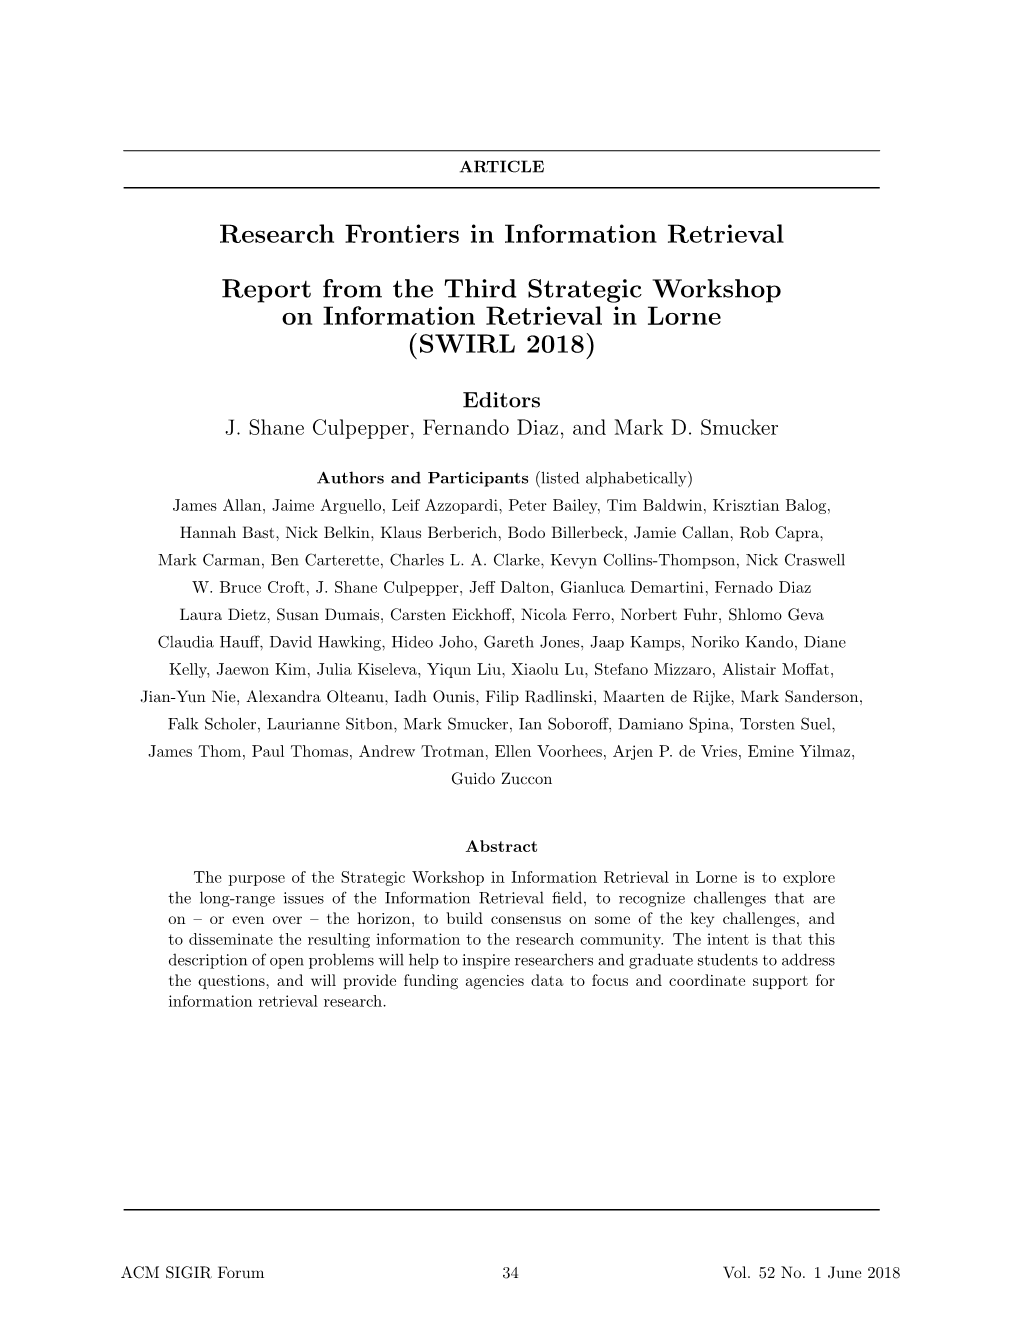 Research Frontiers in Information Retrieval